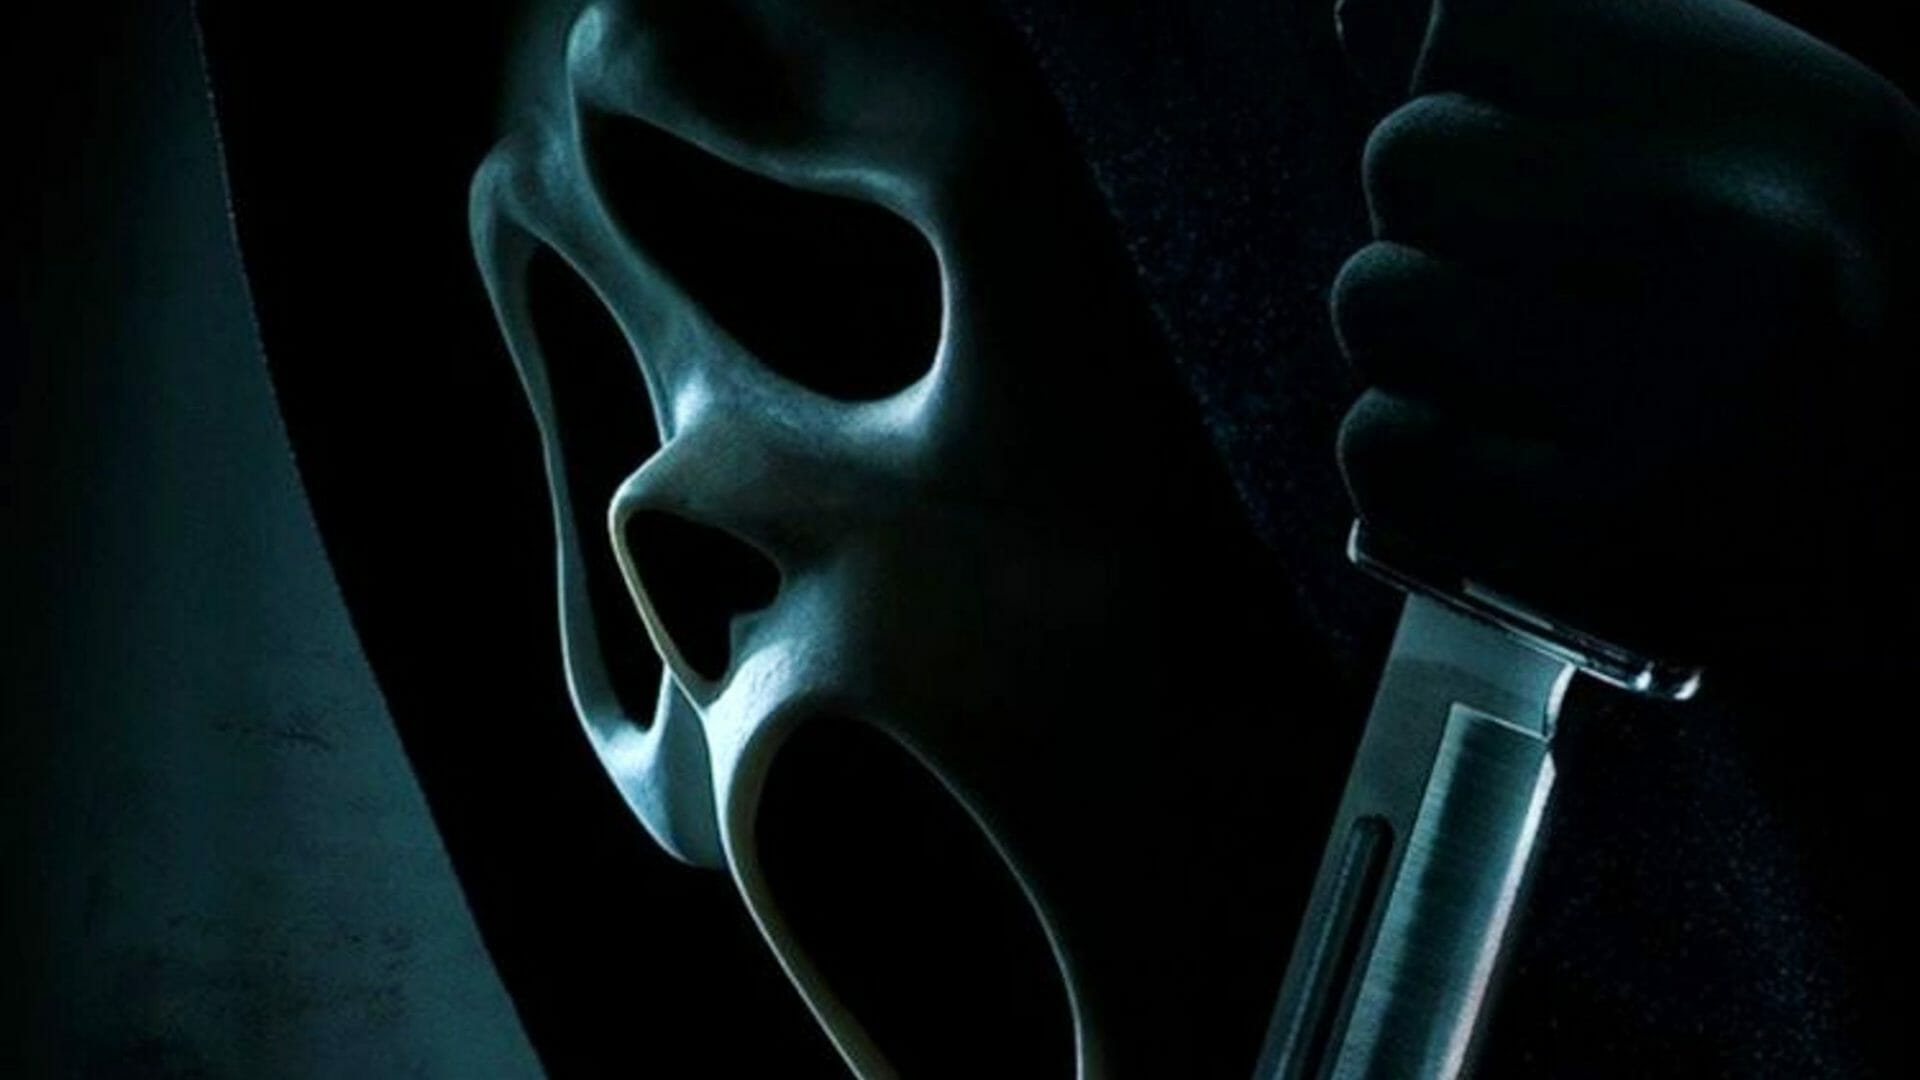 Scream 5 (2022): What Storyline You Should Definitely Know Before January 14 Premiere?